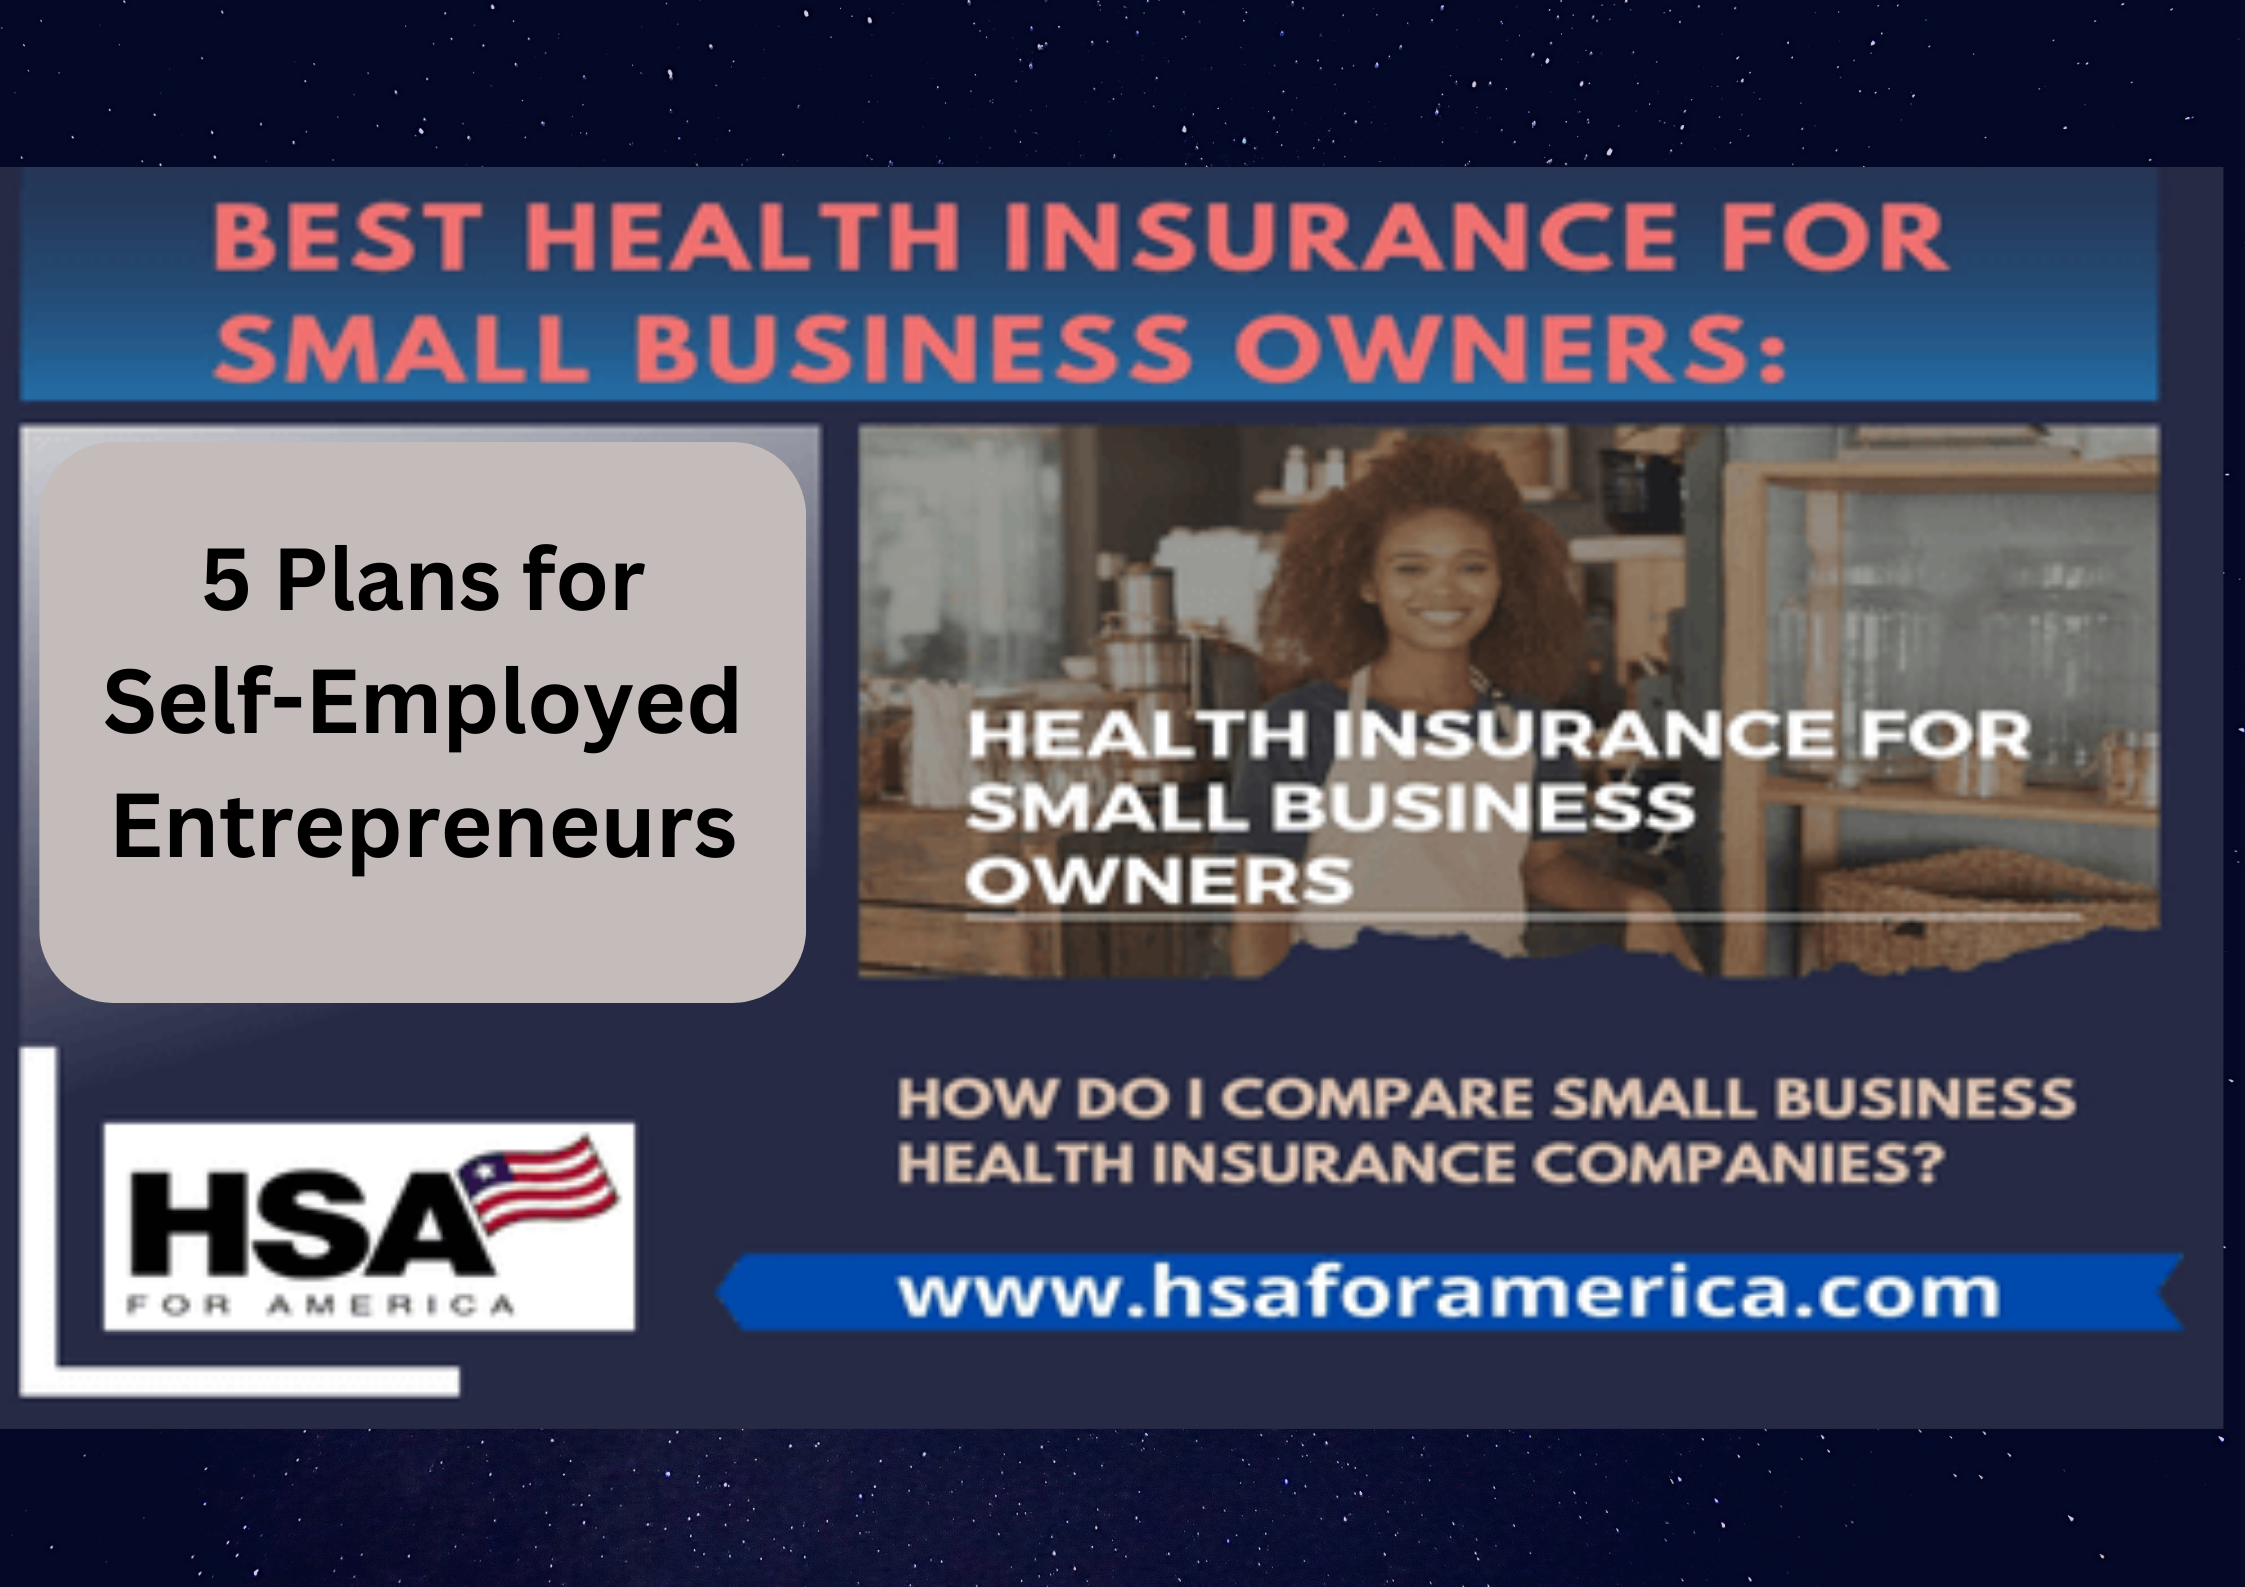 Best Health Insurance for Small Business Owners